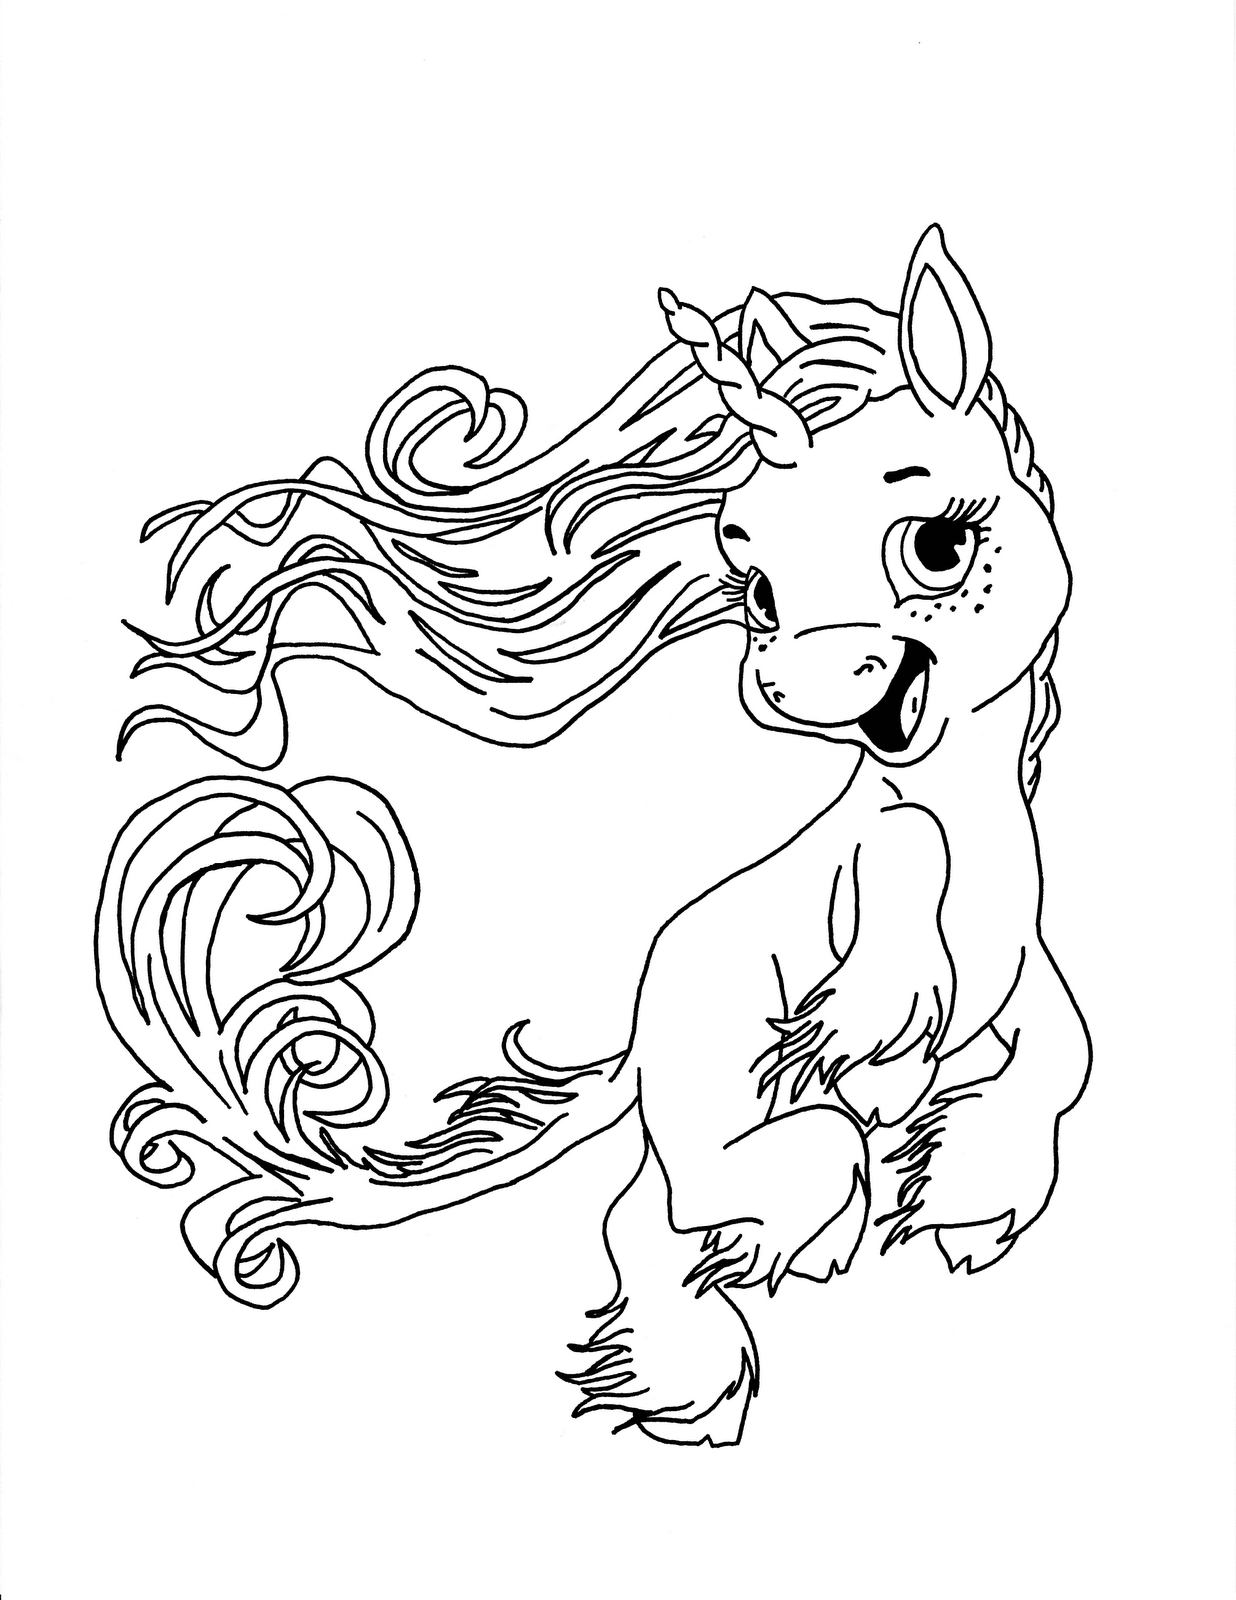 Happy Unicorn Coloring Page - Free Printable Coloring Pages for Kids